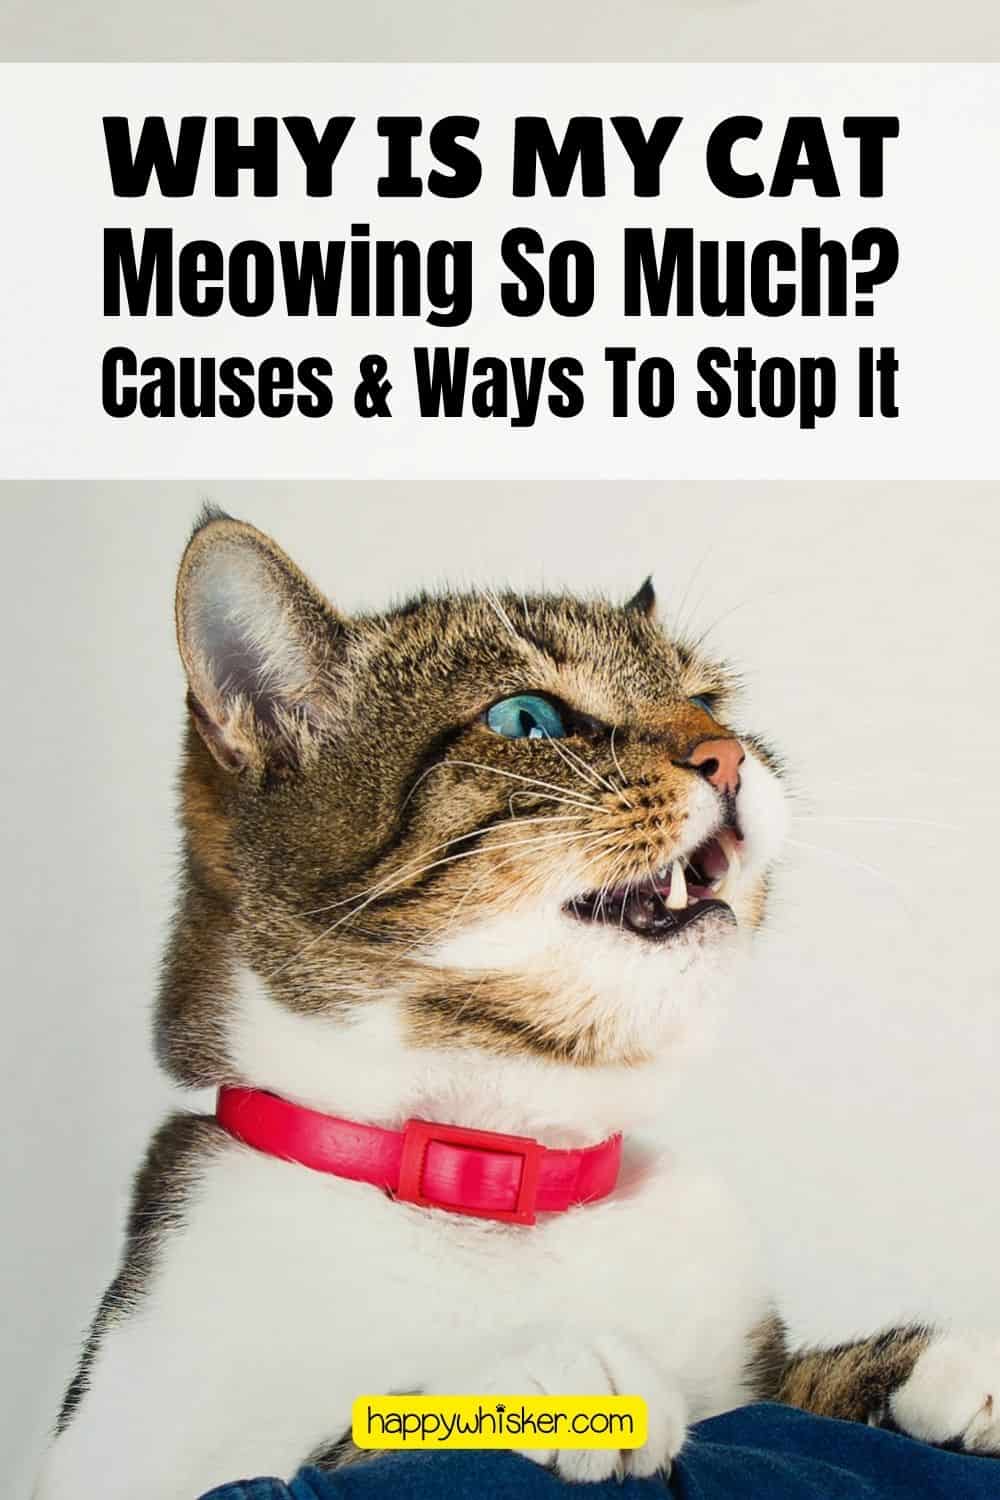 Why Is My Cat Meowing So Much Causes & Ways To Stop It Pinterest